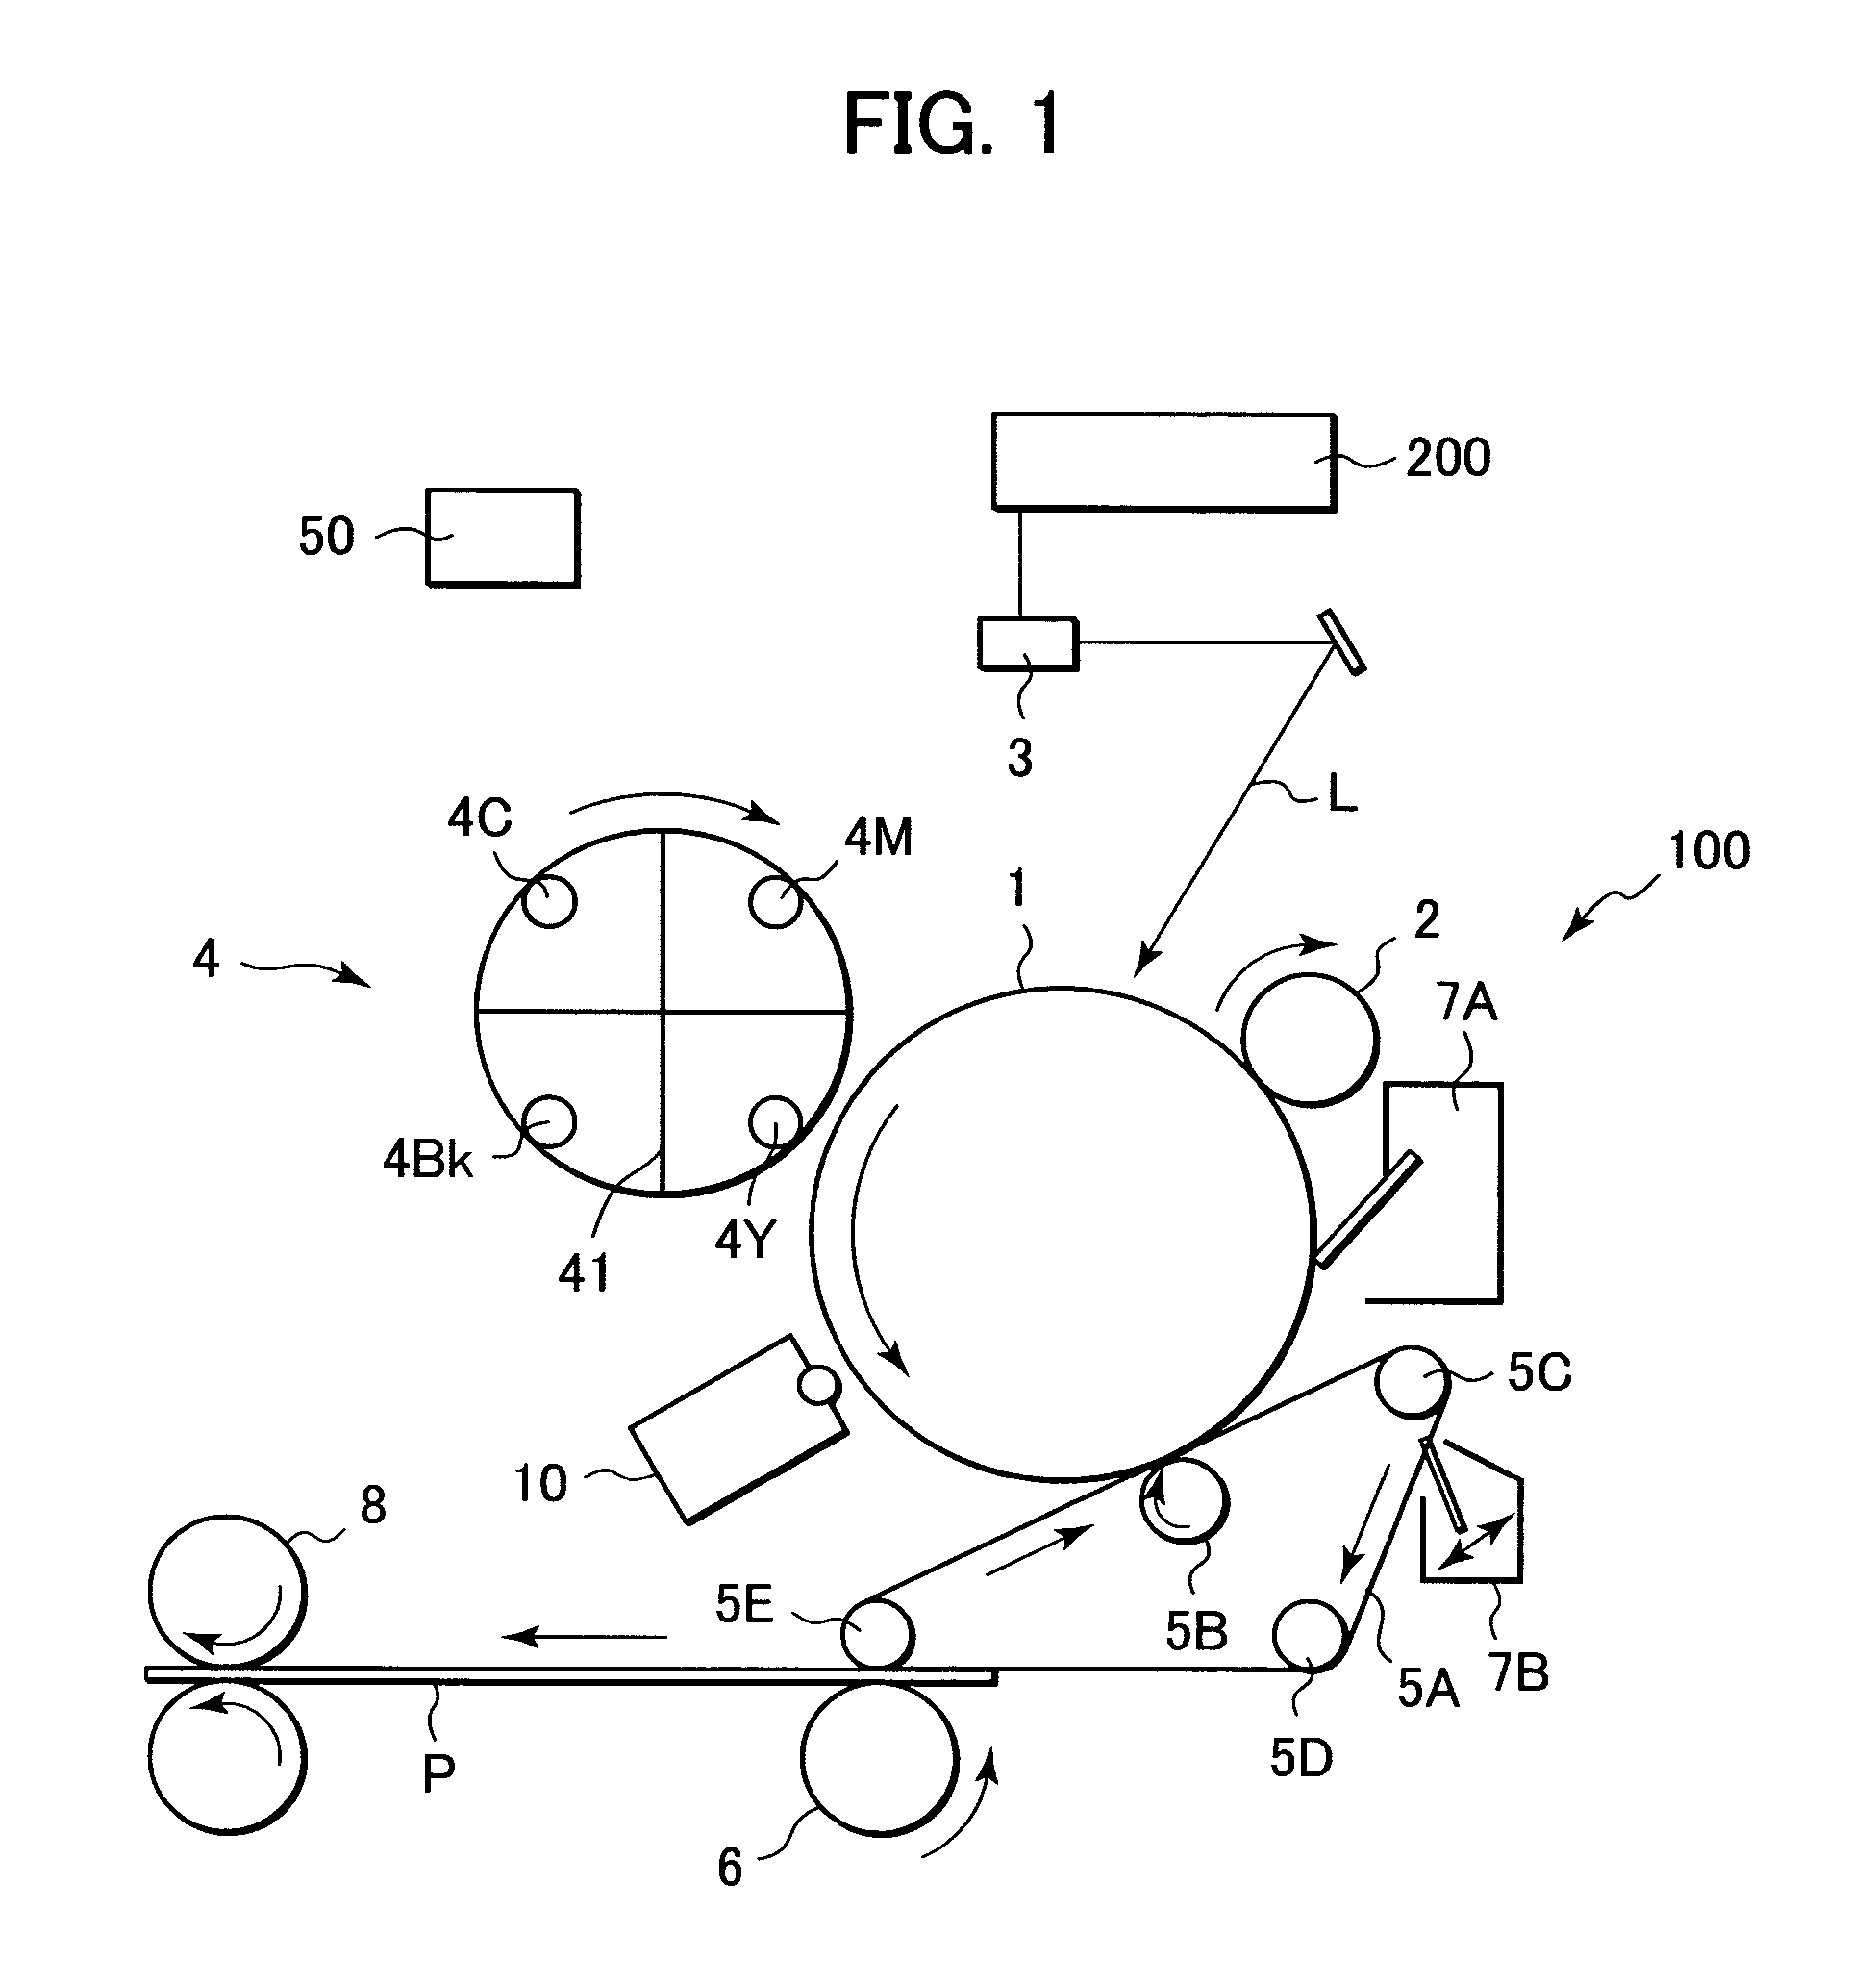 Image forming apparatus with a toner image density feature and related method